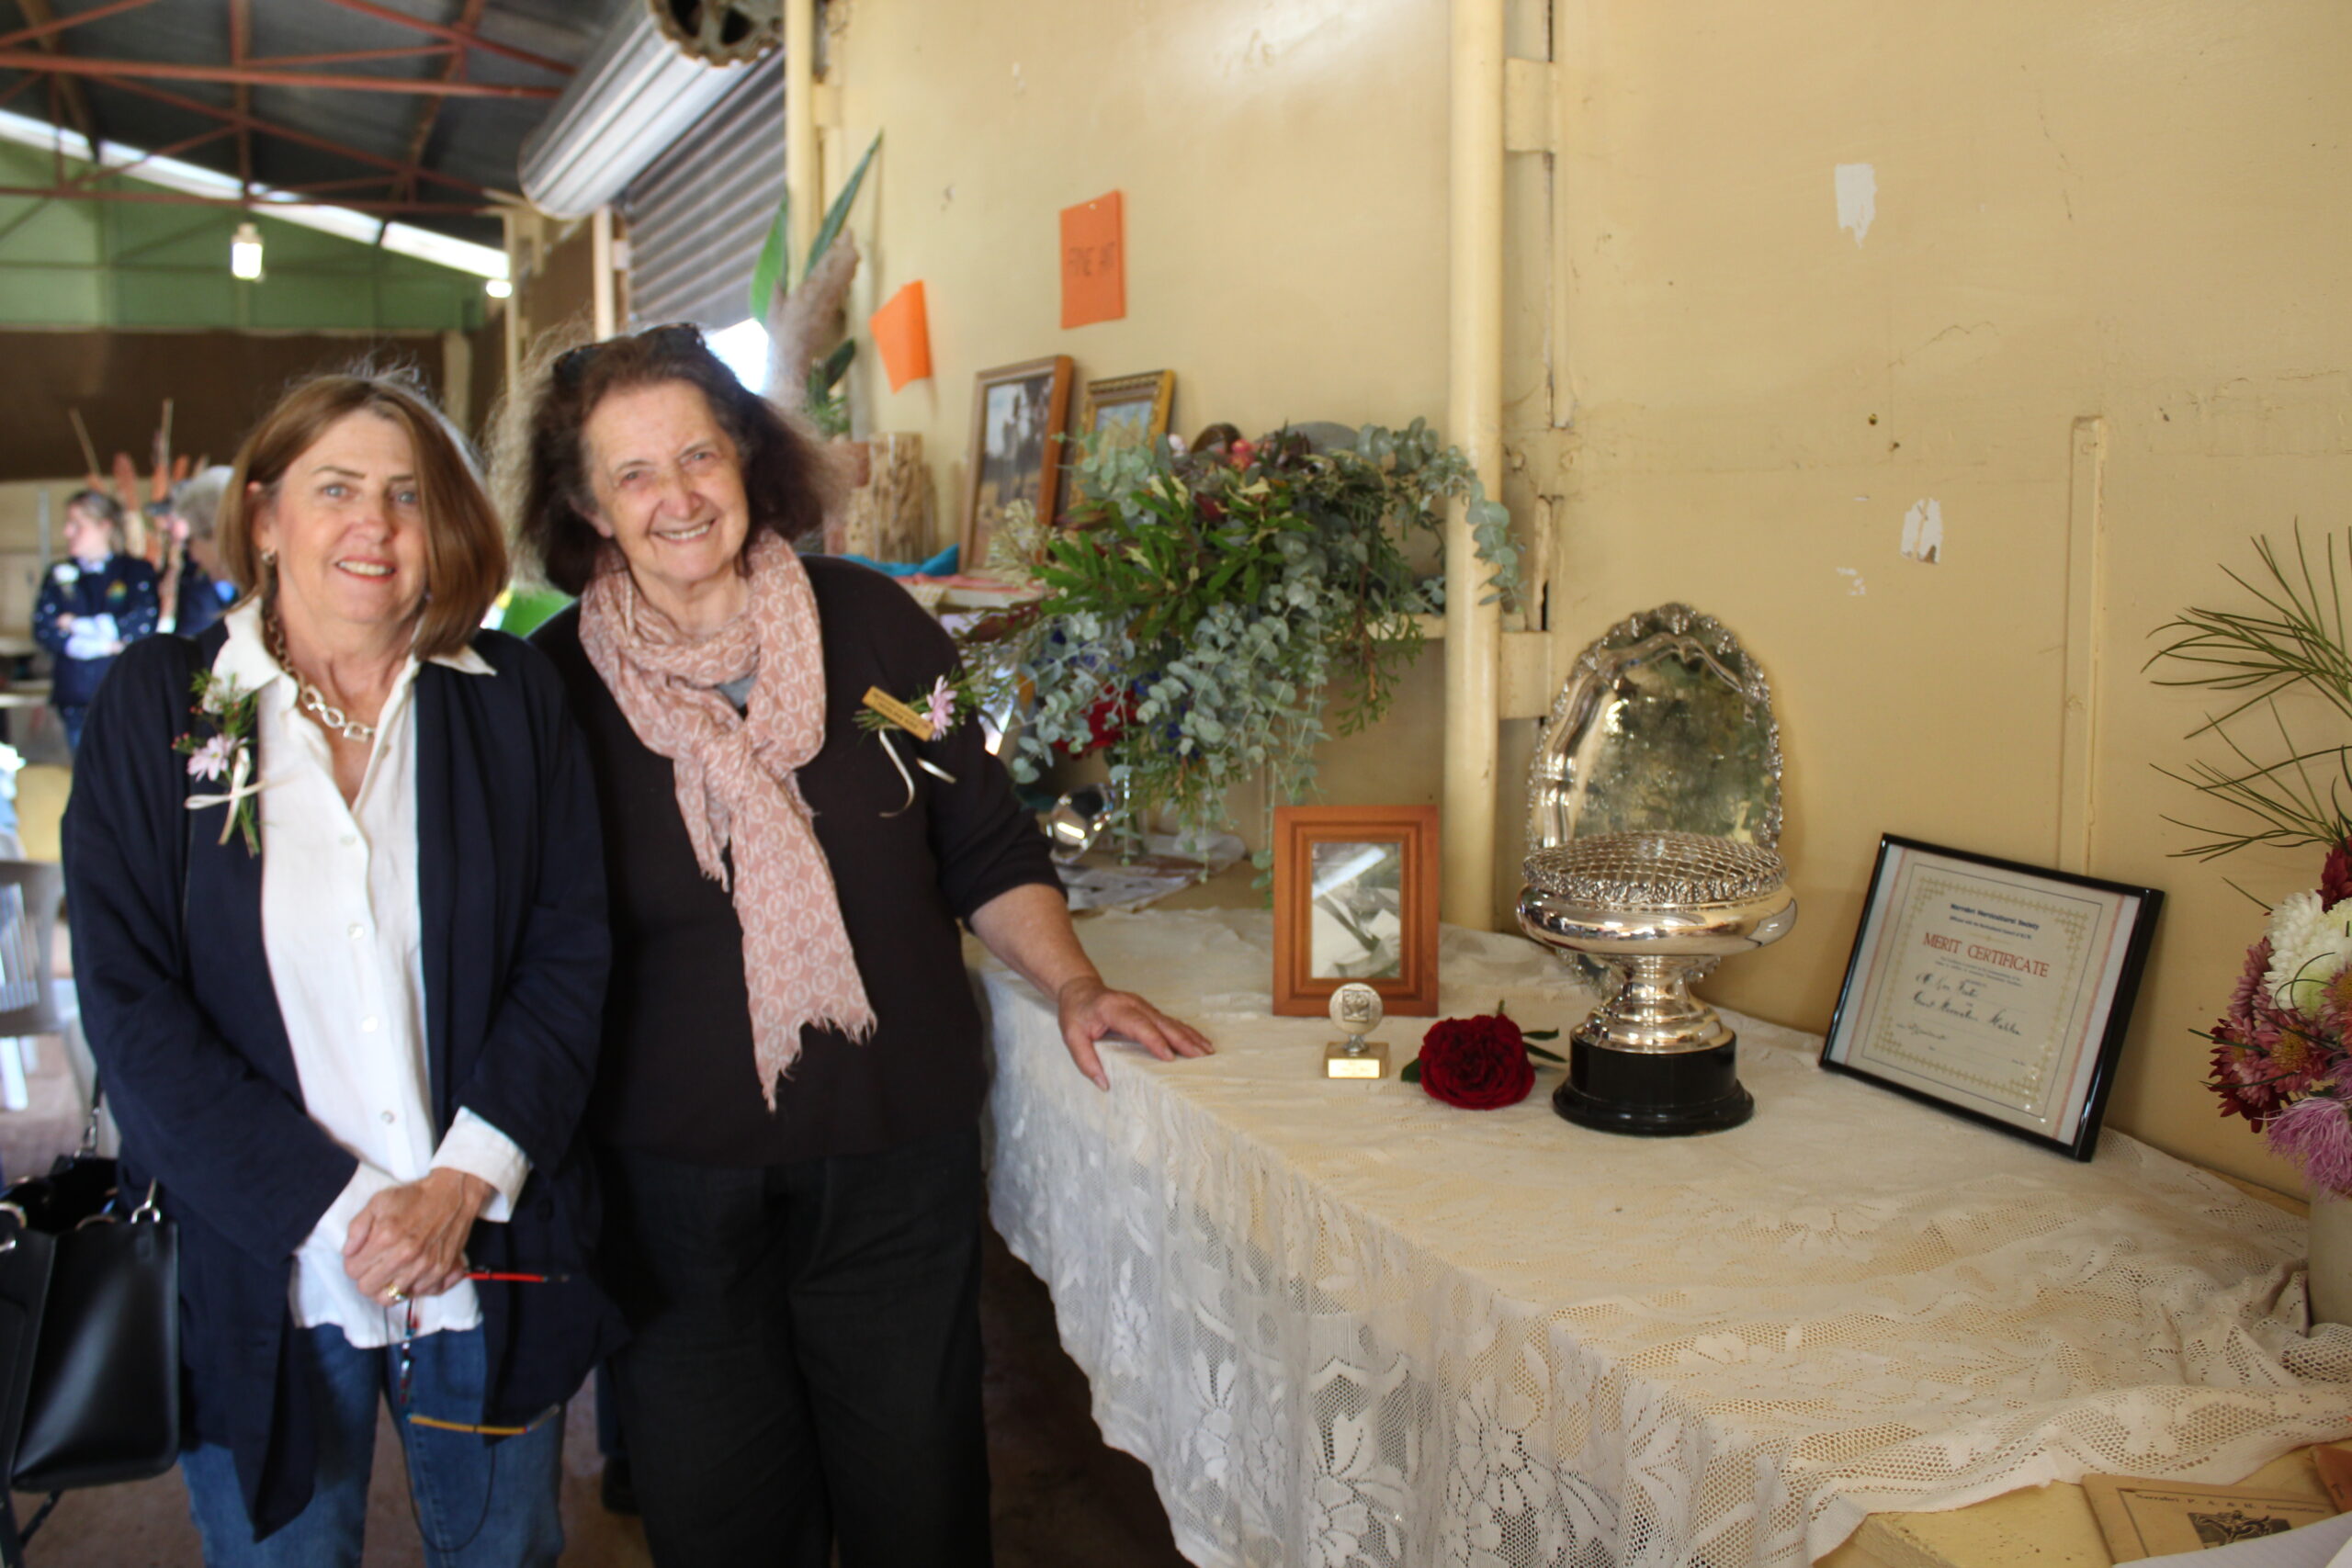 Mr Foxe’s niece, Helen Busby, and Noeline Kiss (Narrabri Garden Club vice-president) with his awards and photo.